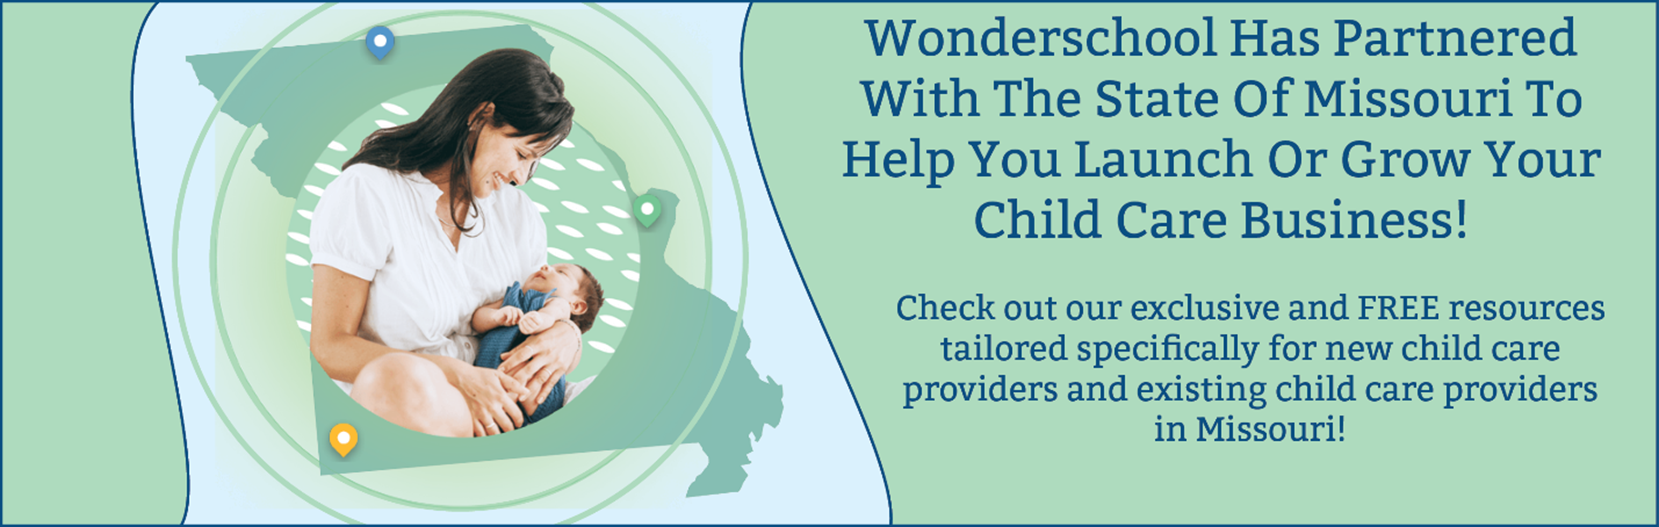 Wonderschool has partnered with the state of Missouri to help you launch or grow your child care business! Check out our exclusive and FREE resources tailored specifically for new child care providers and existing child care providers in Missouri!